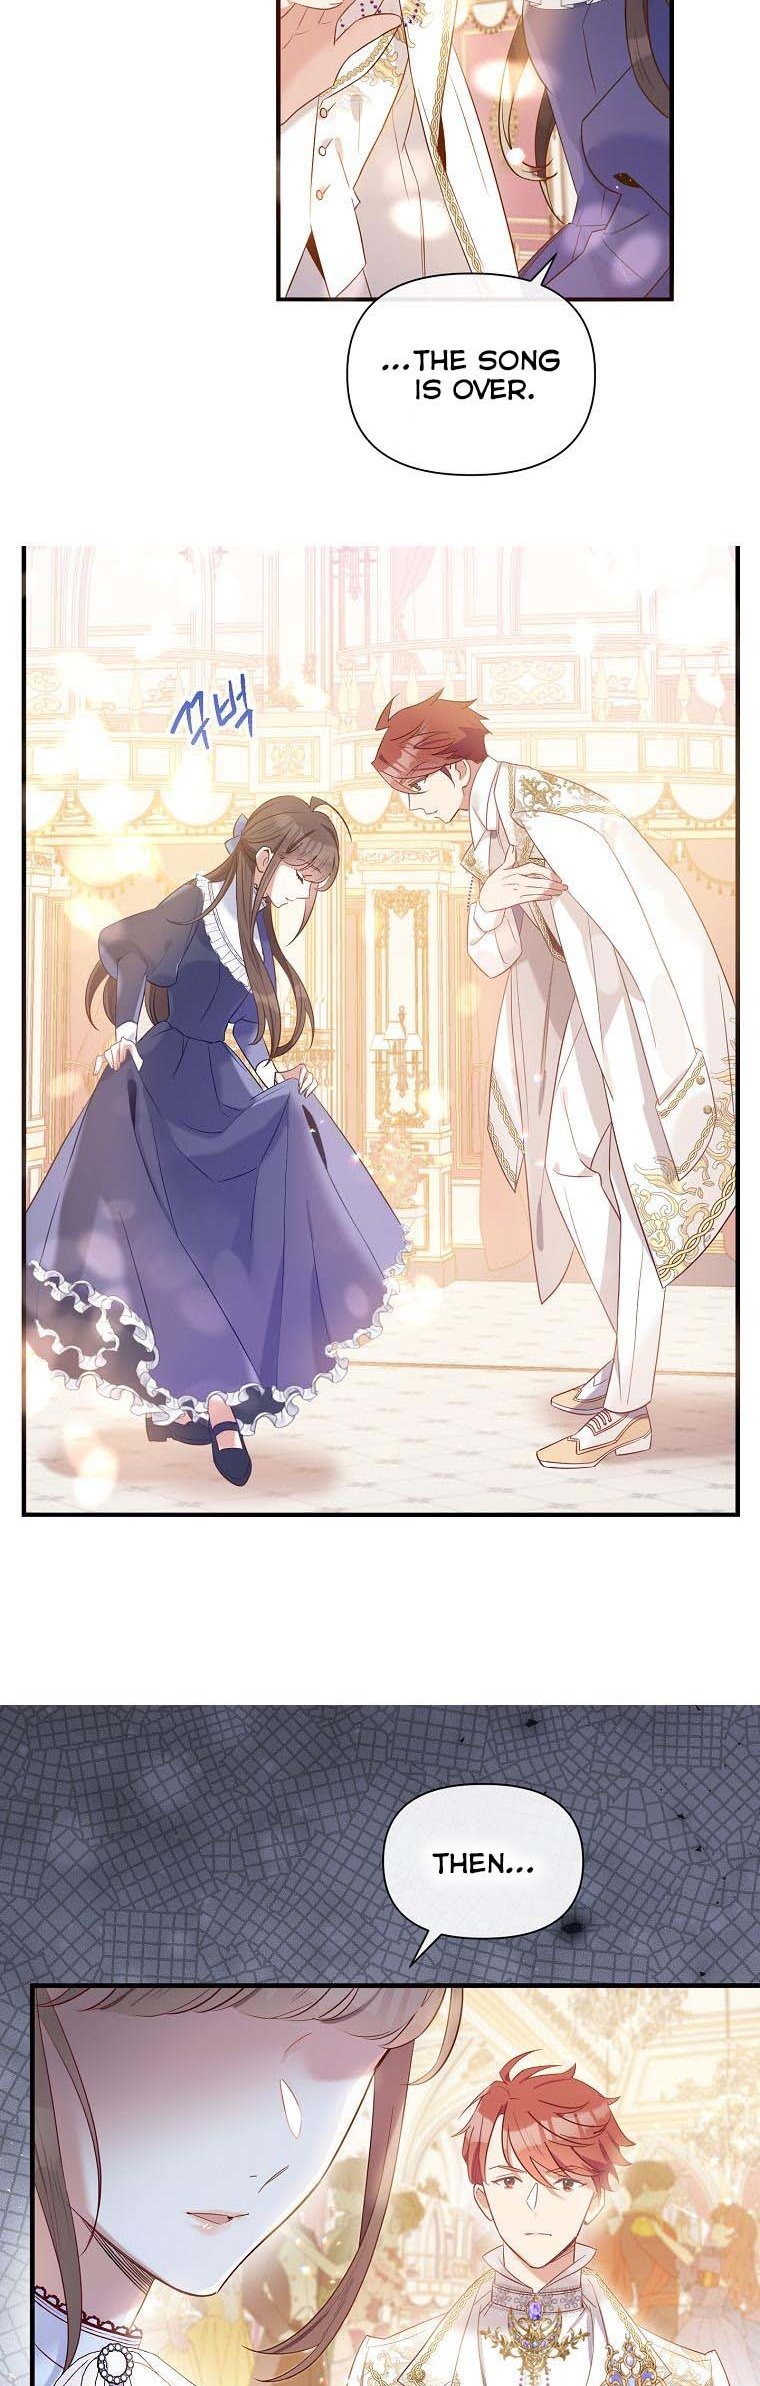 Marriage B chapter 18